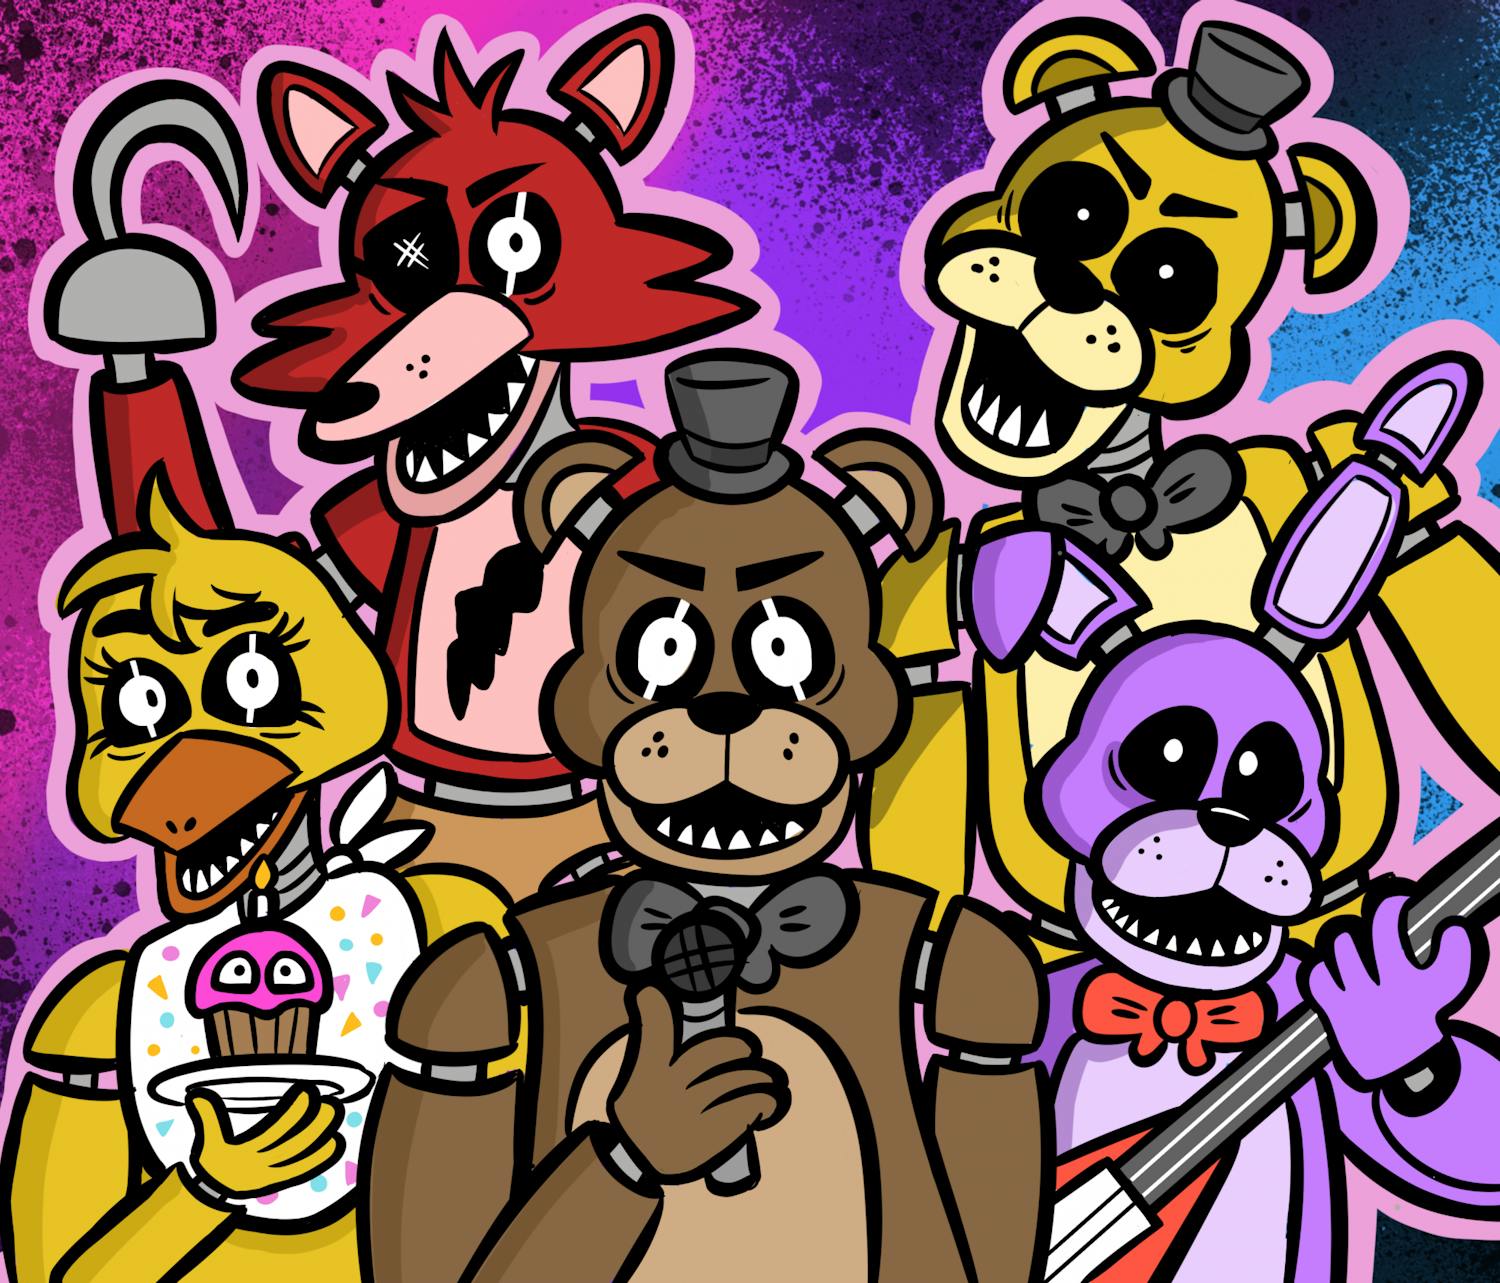 hebben stap Interpreteren Everything we know about the 'Five Nights At Freddy's' movie - The Post